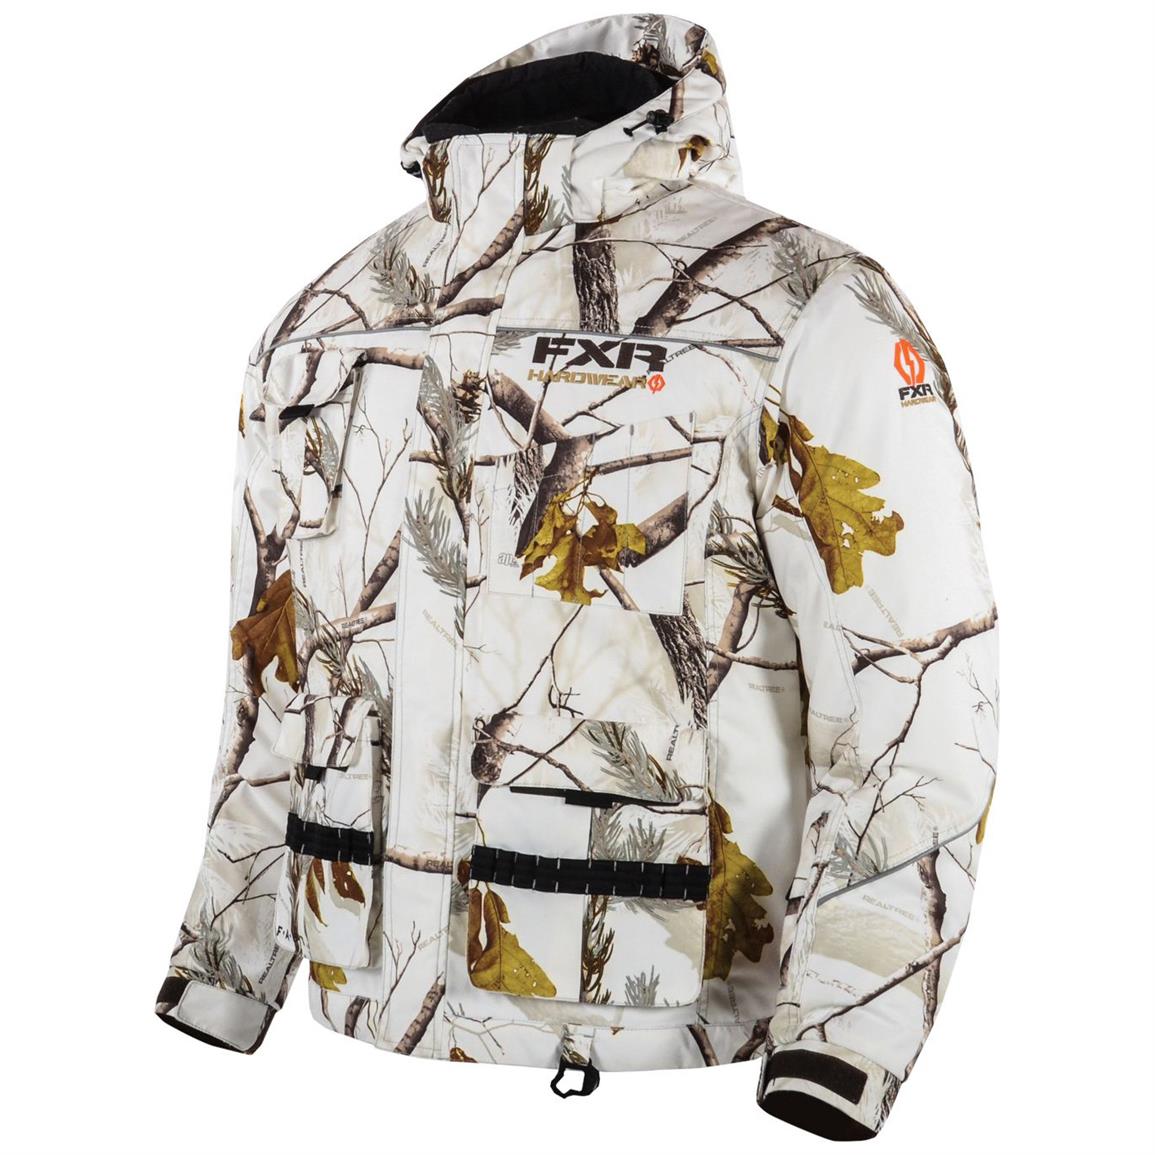 FXR Camo Hardwear Jacket - 627801, Snowmobile Clothing at Sportsman's Guide